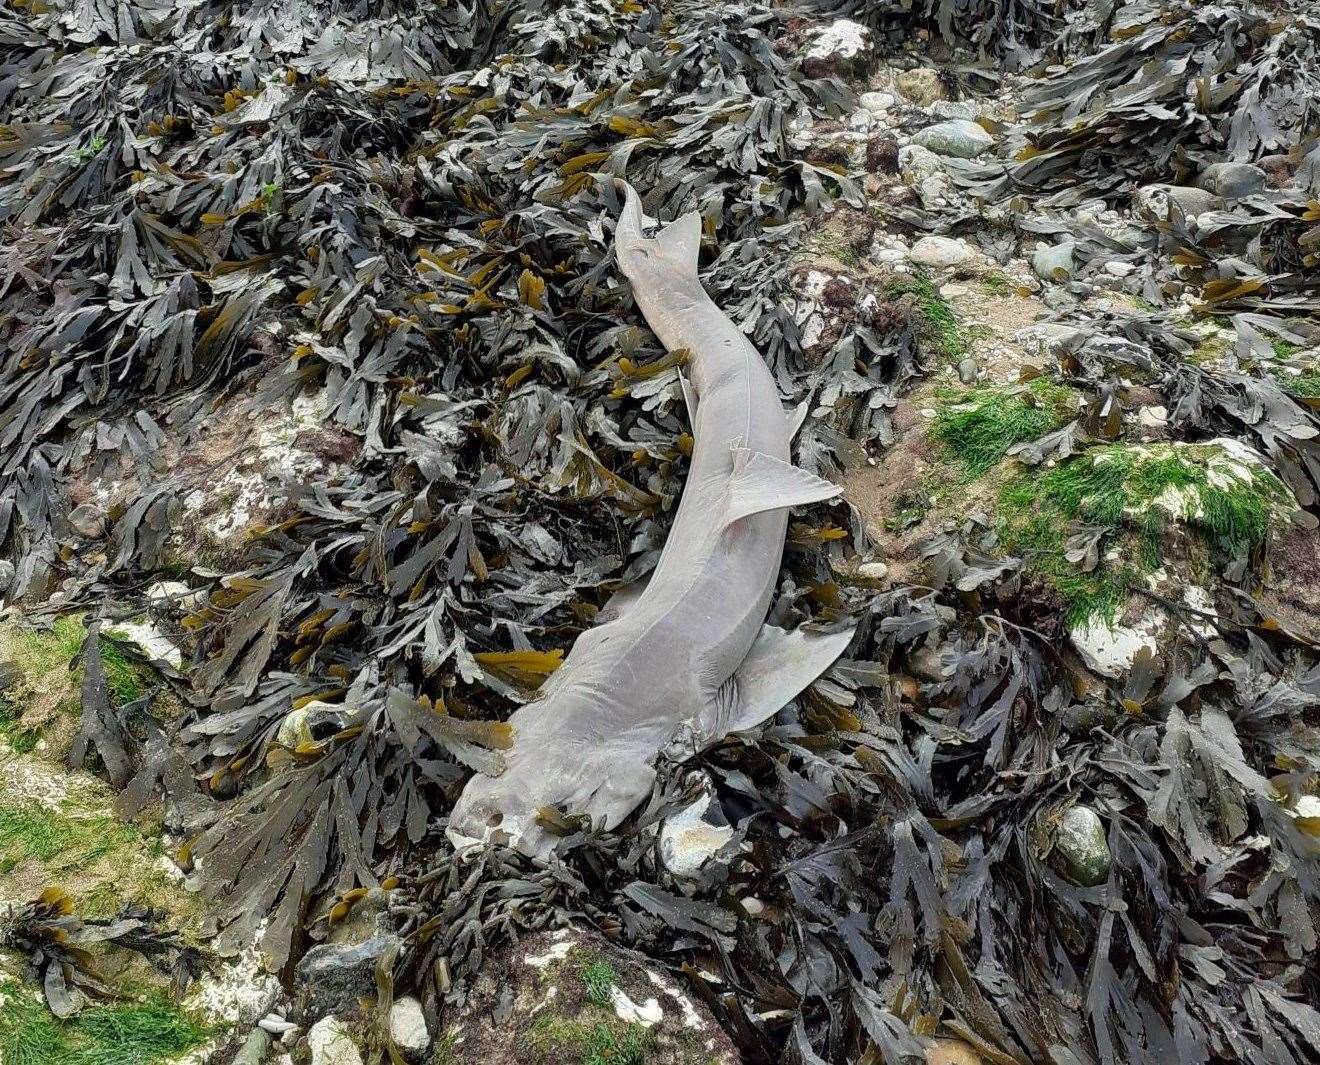 The shark, thought to be a smooth-hound, washed up on Ramsgate beach. Picture: Jan Dunn